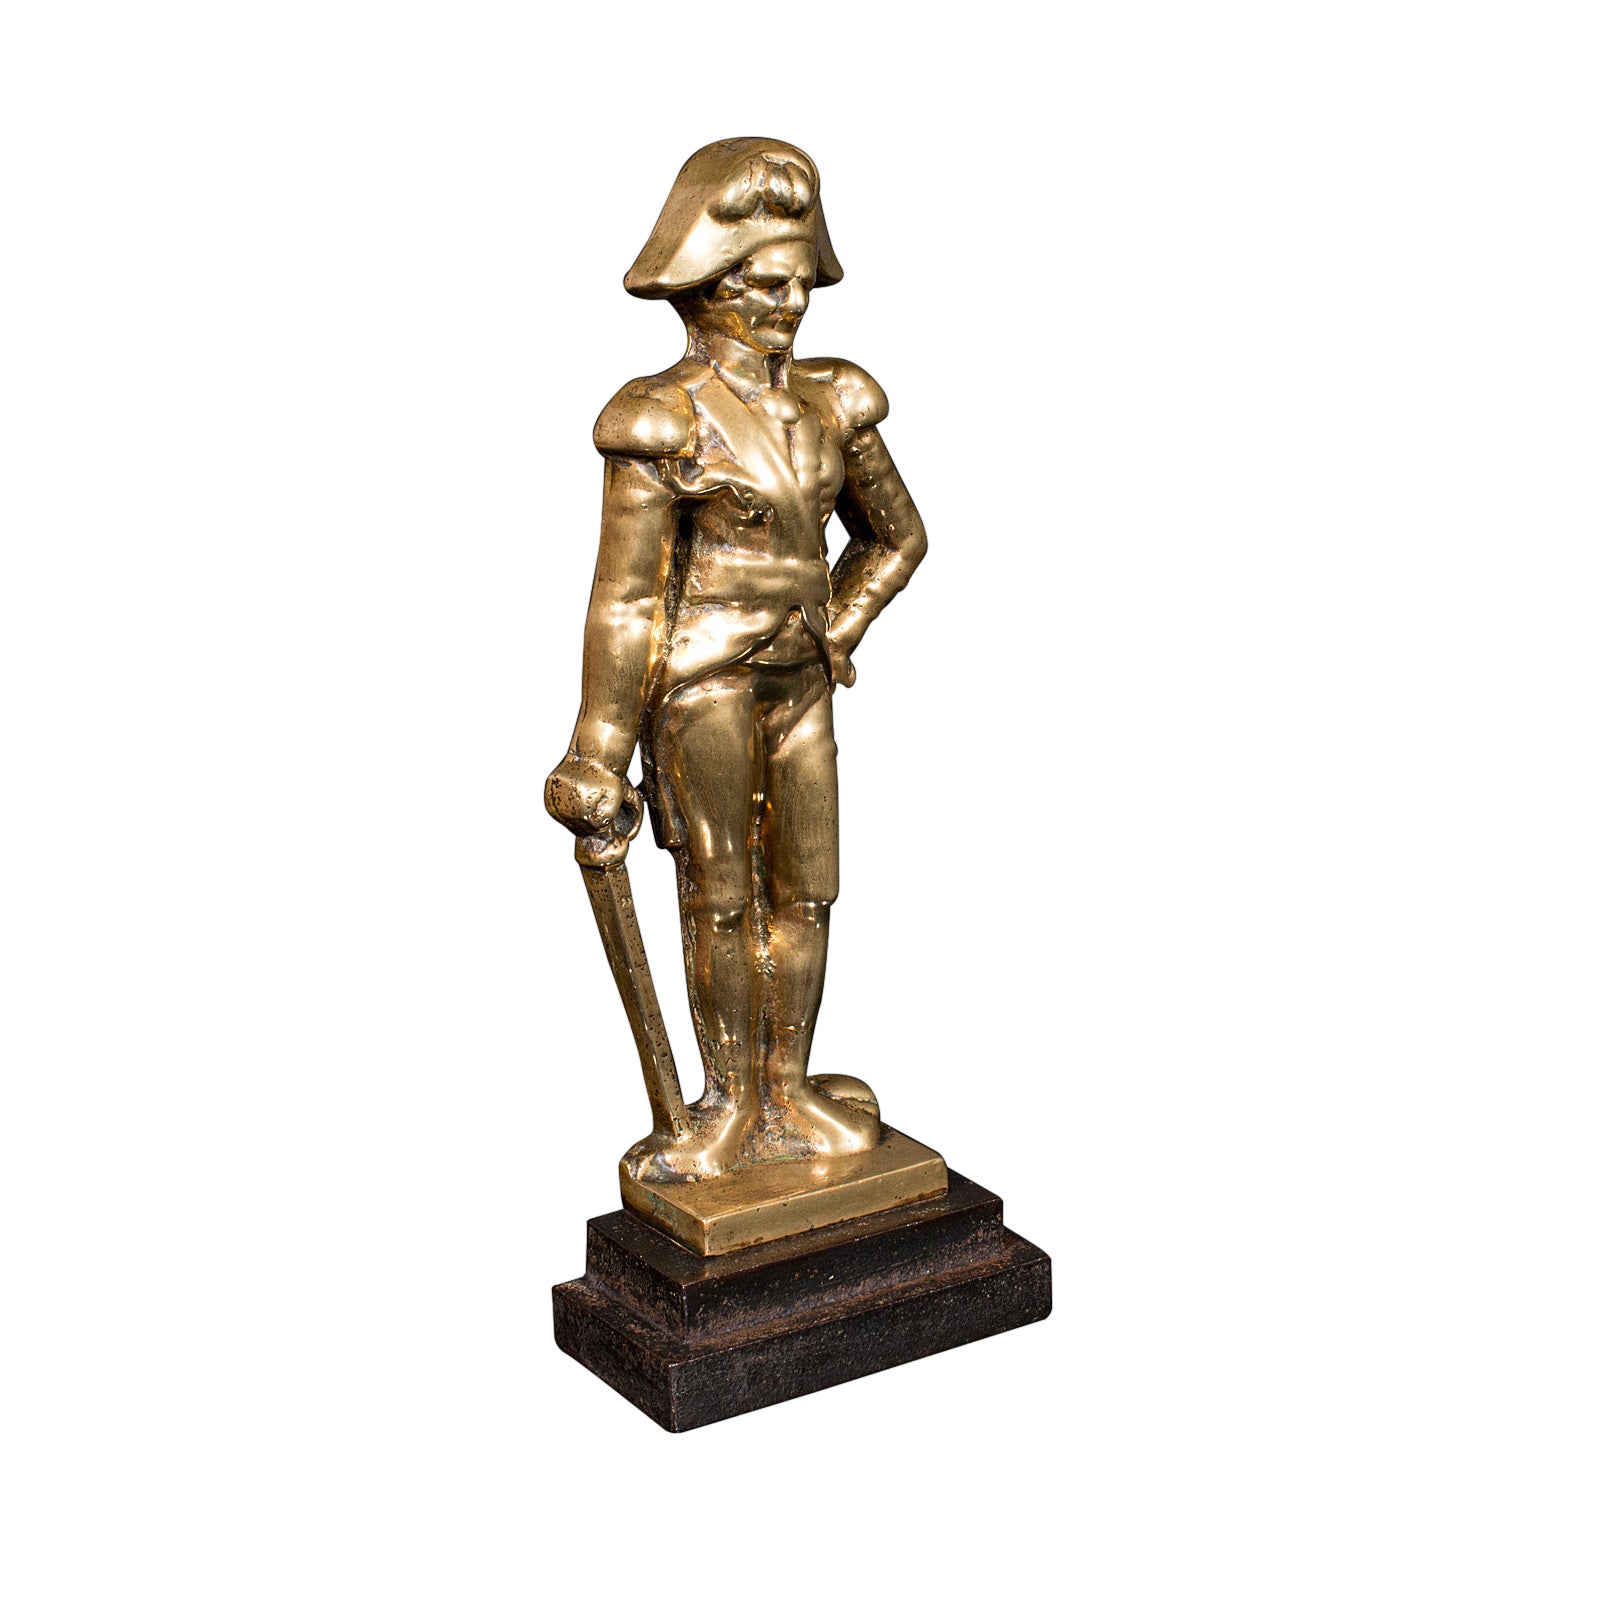 Antique Figural Doorstop, English, Brass, Lord Nelson, Door Keep, Late Georgian For Sale